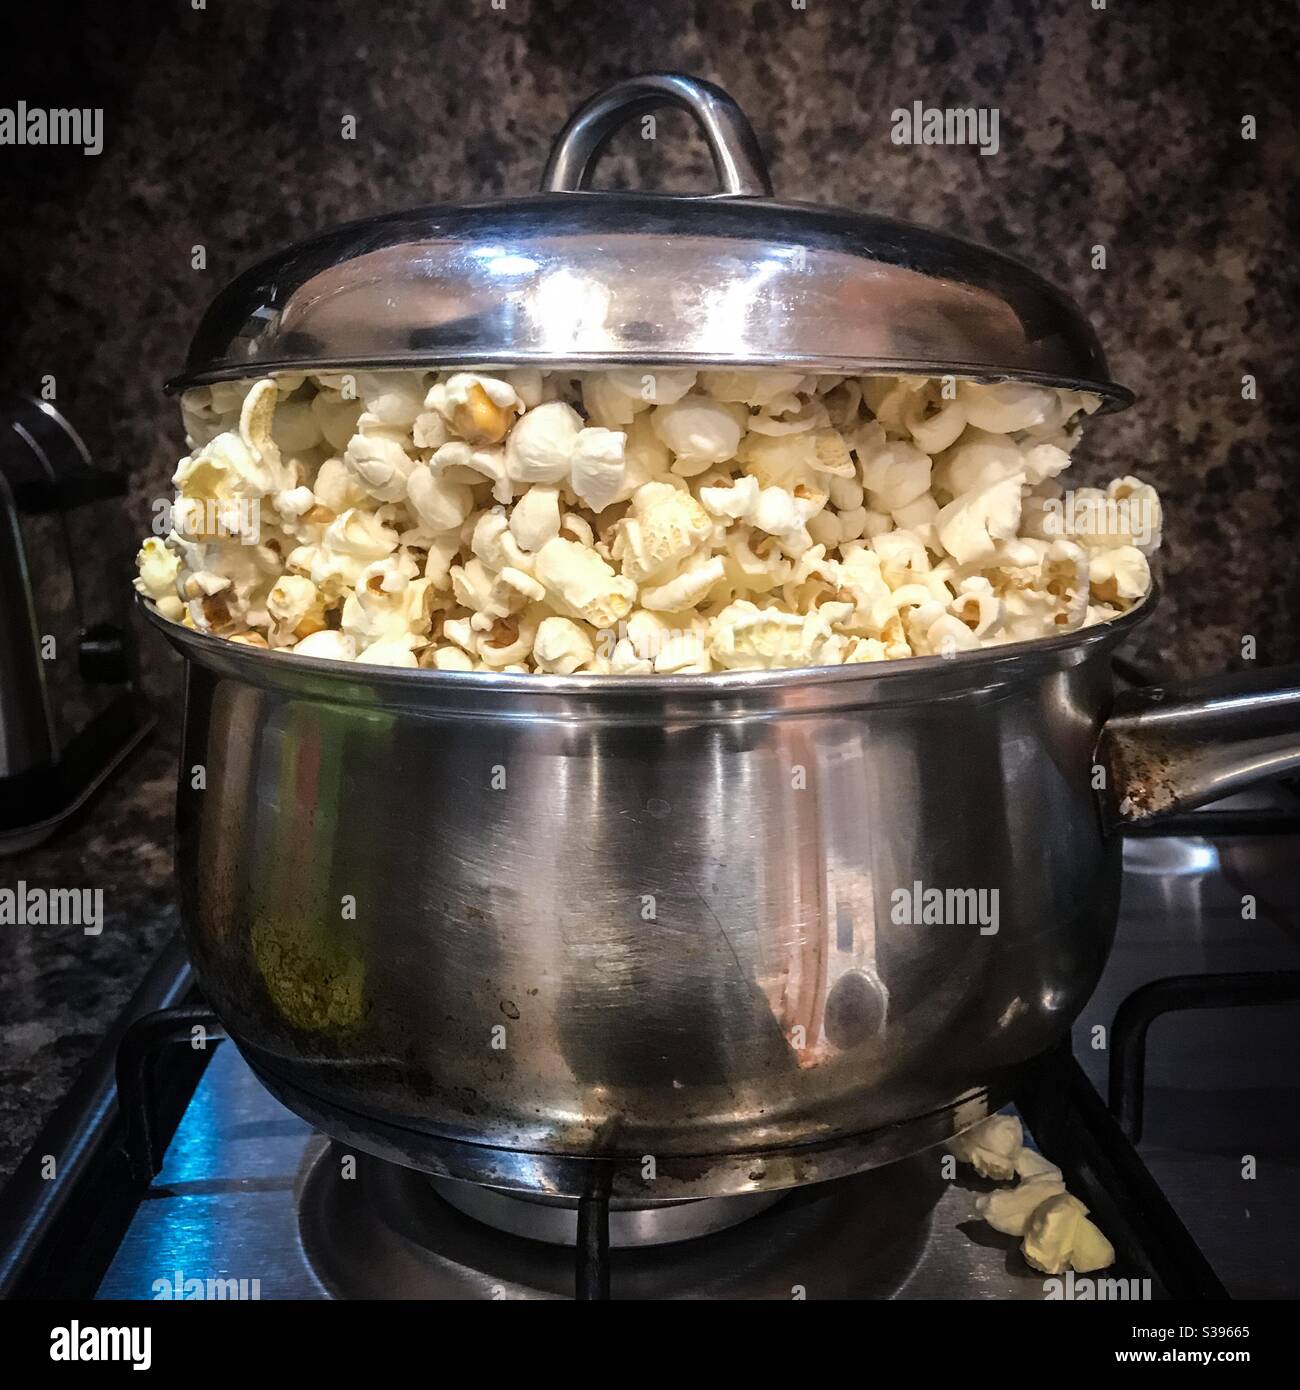 Popcorn overflowing in a pot on a gas hob Stock Photo